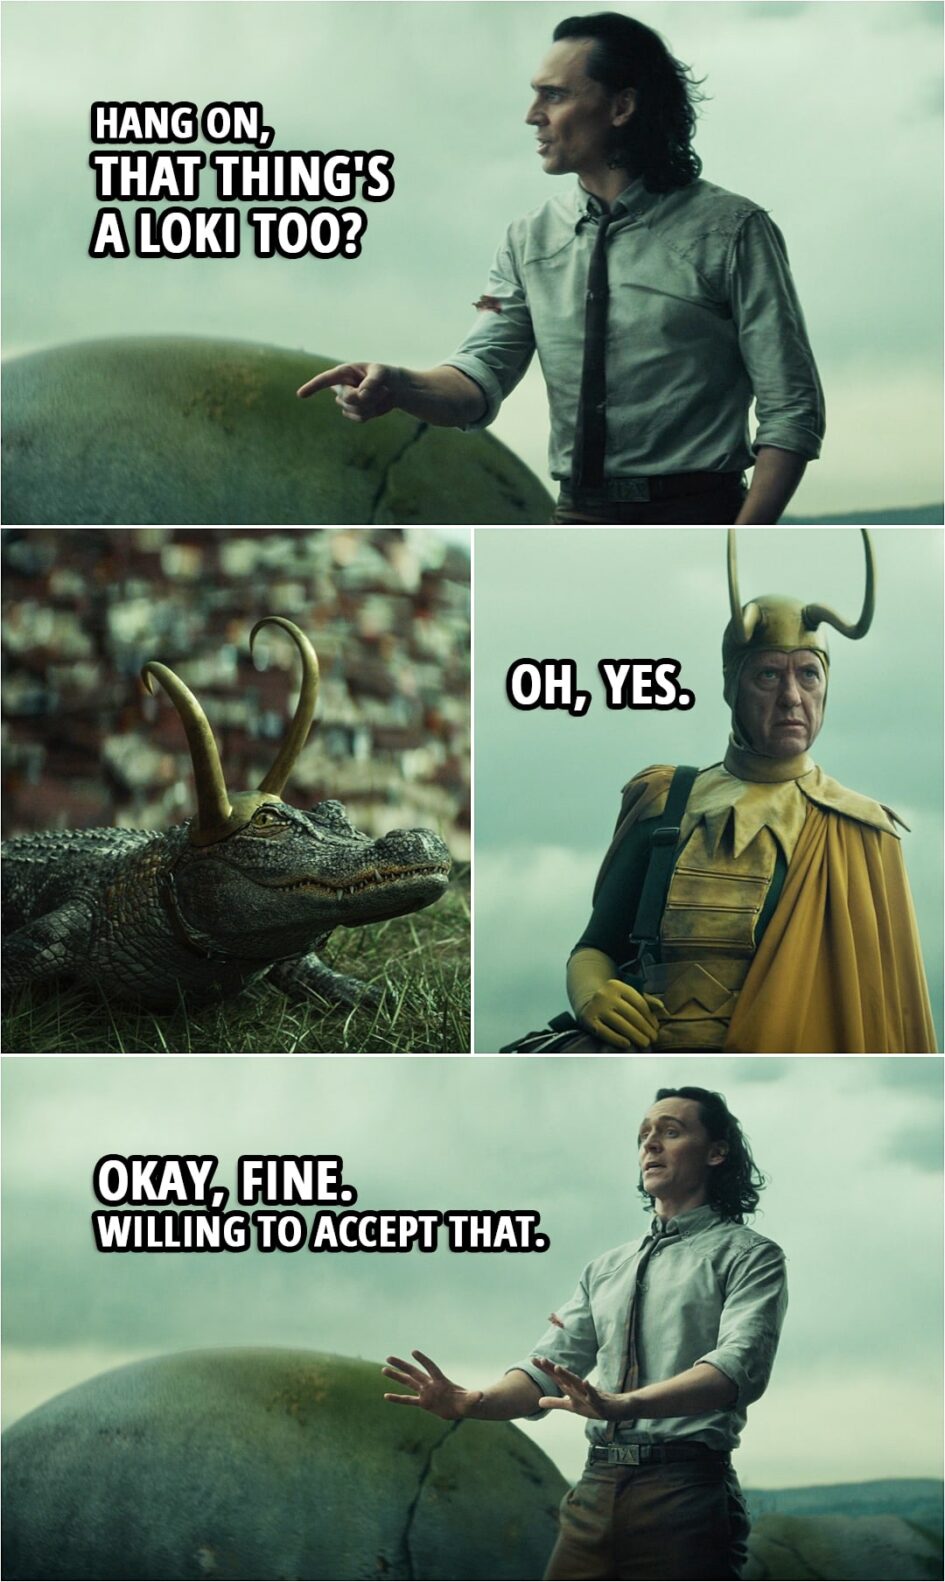 Quote from Loki 1x05 | Classic Loki: We're in a shark tank. Alioth is the shark. (Alligator Loki growls) Oh, there's no such thing as an alligator tank. Besides, it's a better metaphor. He's overly sensitive like the rest of us. Loki: Hang on, that thing's a Loki too? Classic Loki: Oh, yes. Loki: Okay, fine. Willing to accept that.